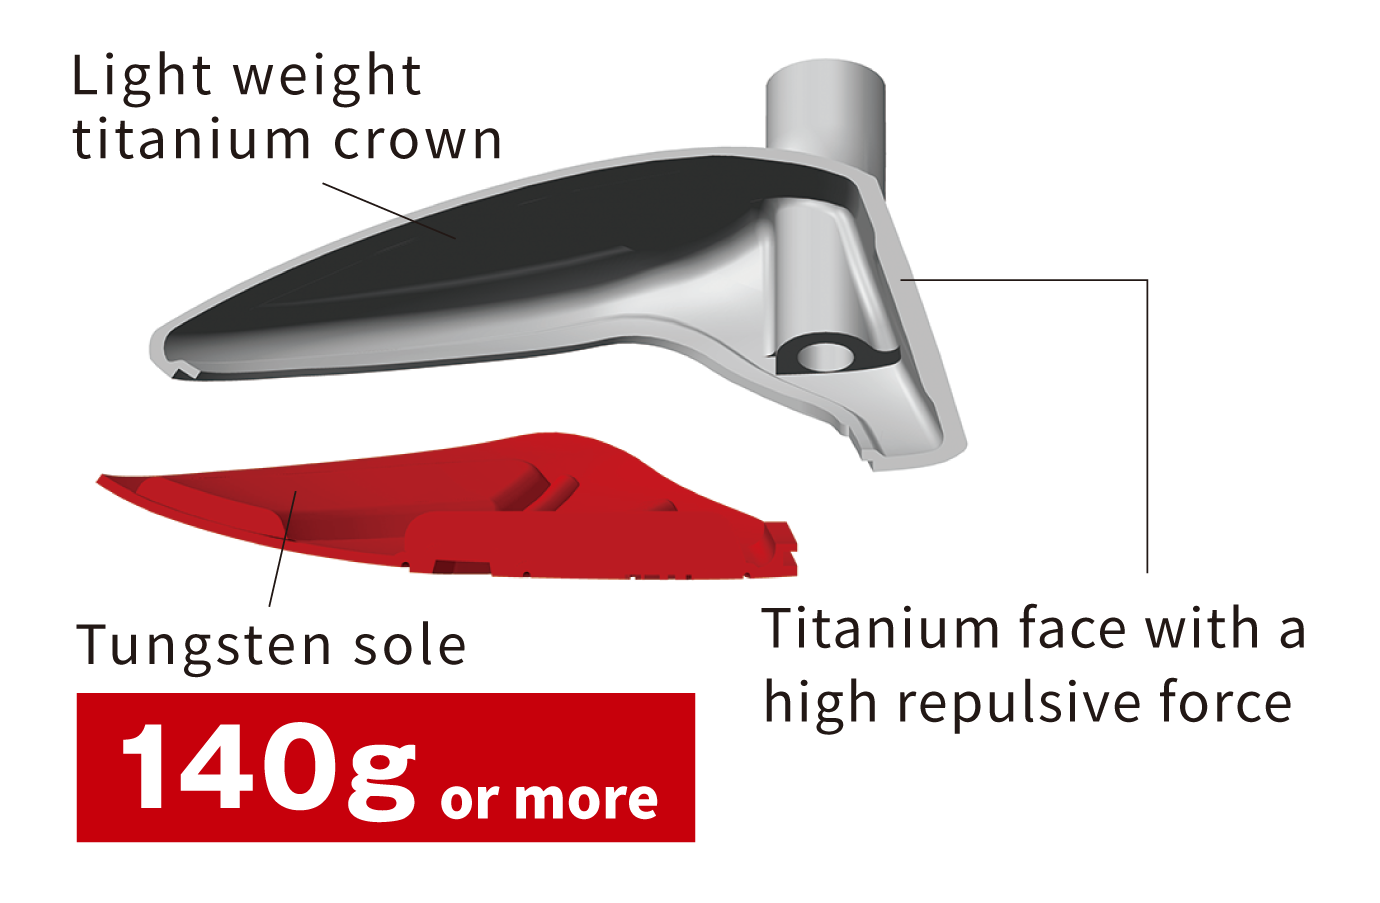 Light weight titanium crown. Titanium face with a high repulsive force. Tungsten sole 140g or more